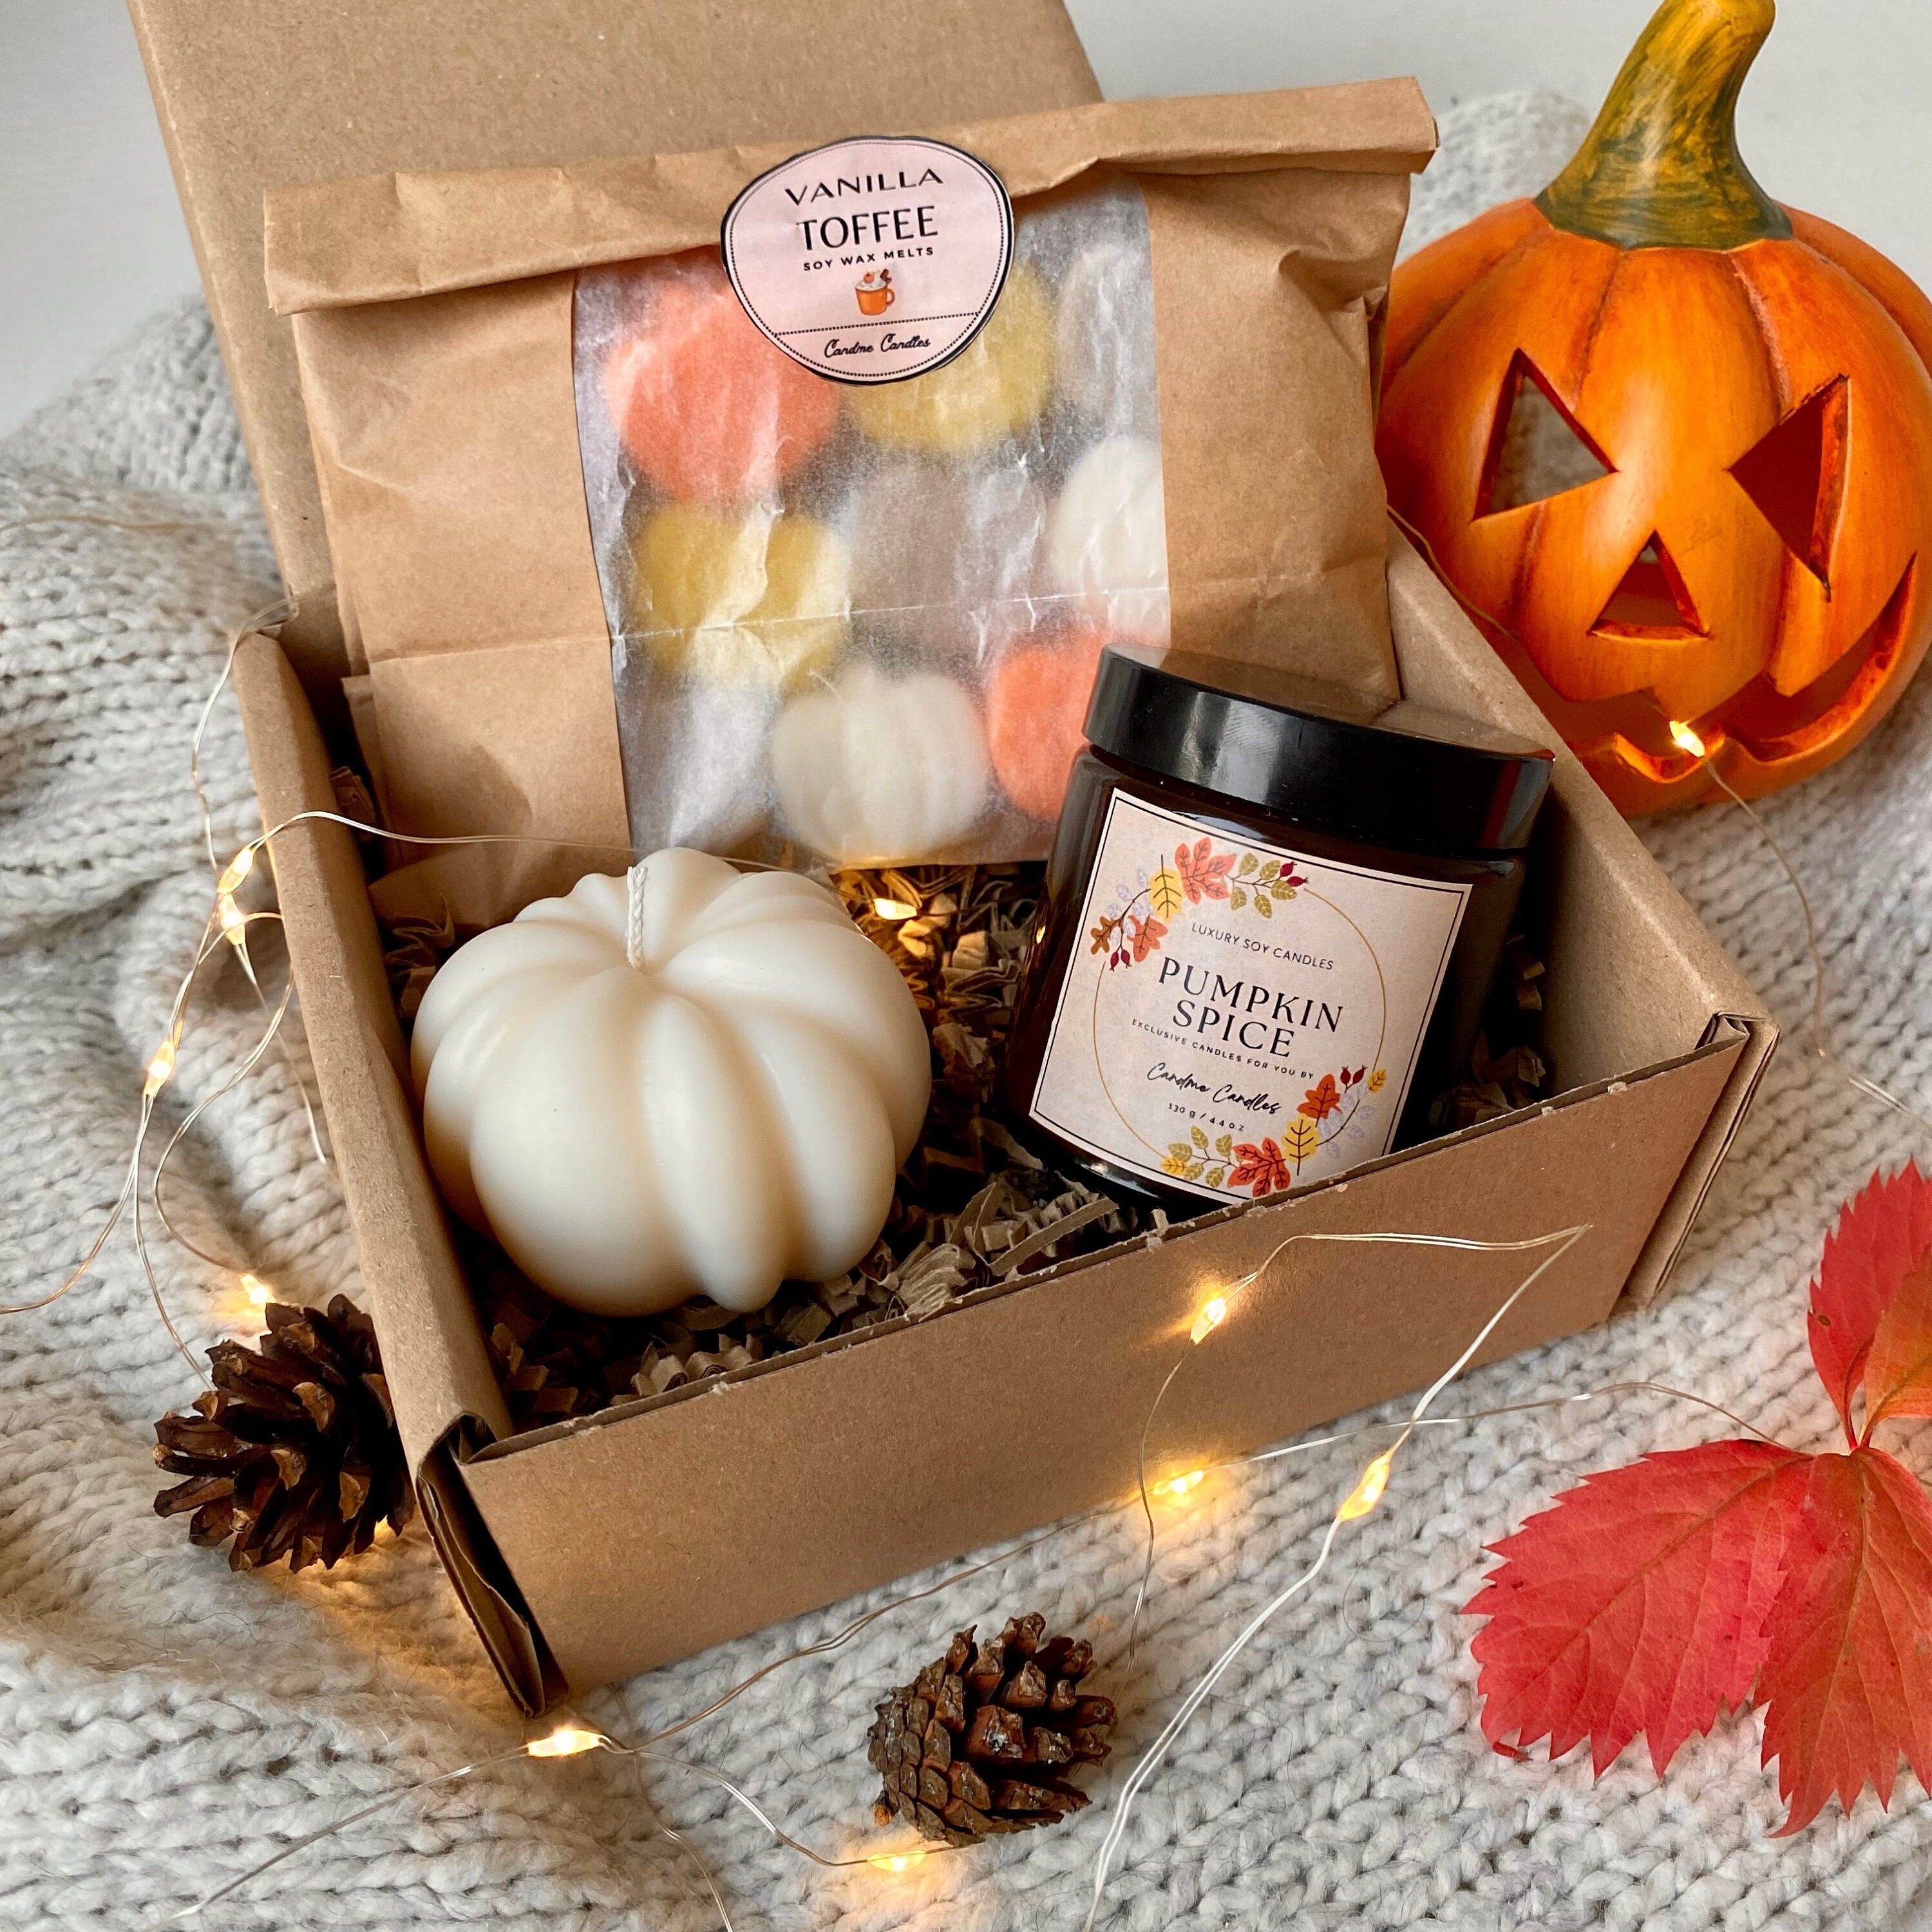 Pumpkin Spice Soy Wax Candle / Halloween Candle Gift / Autumn Home